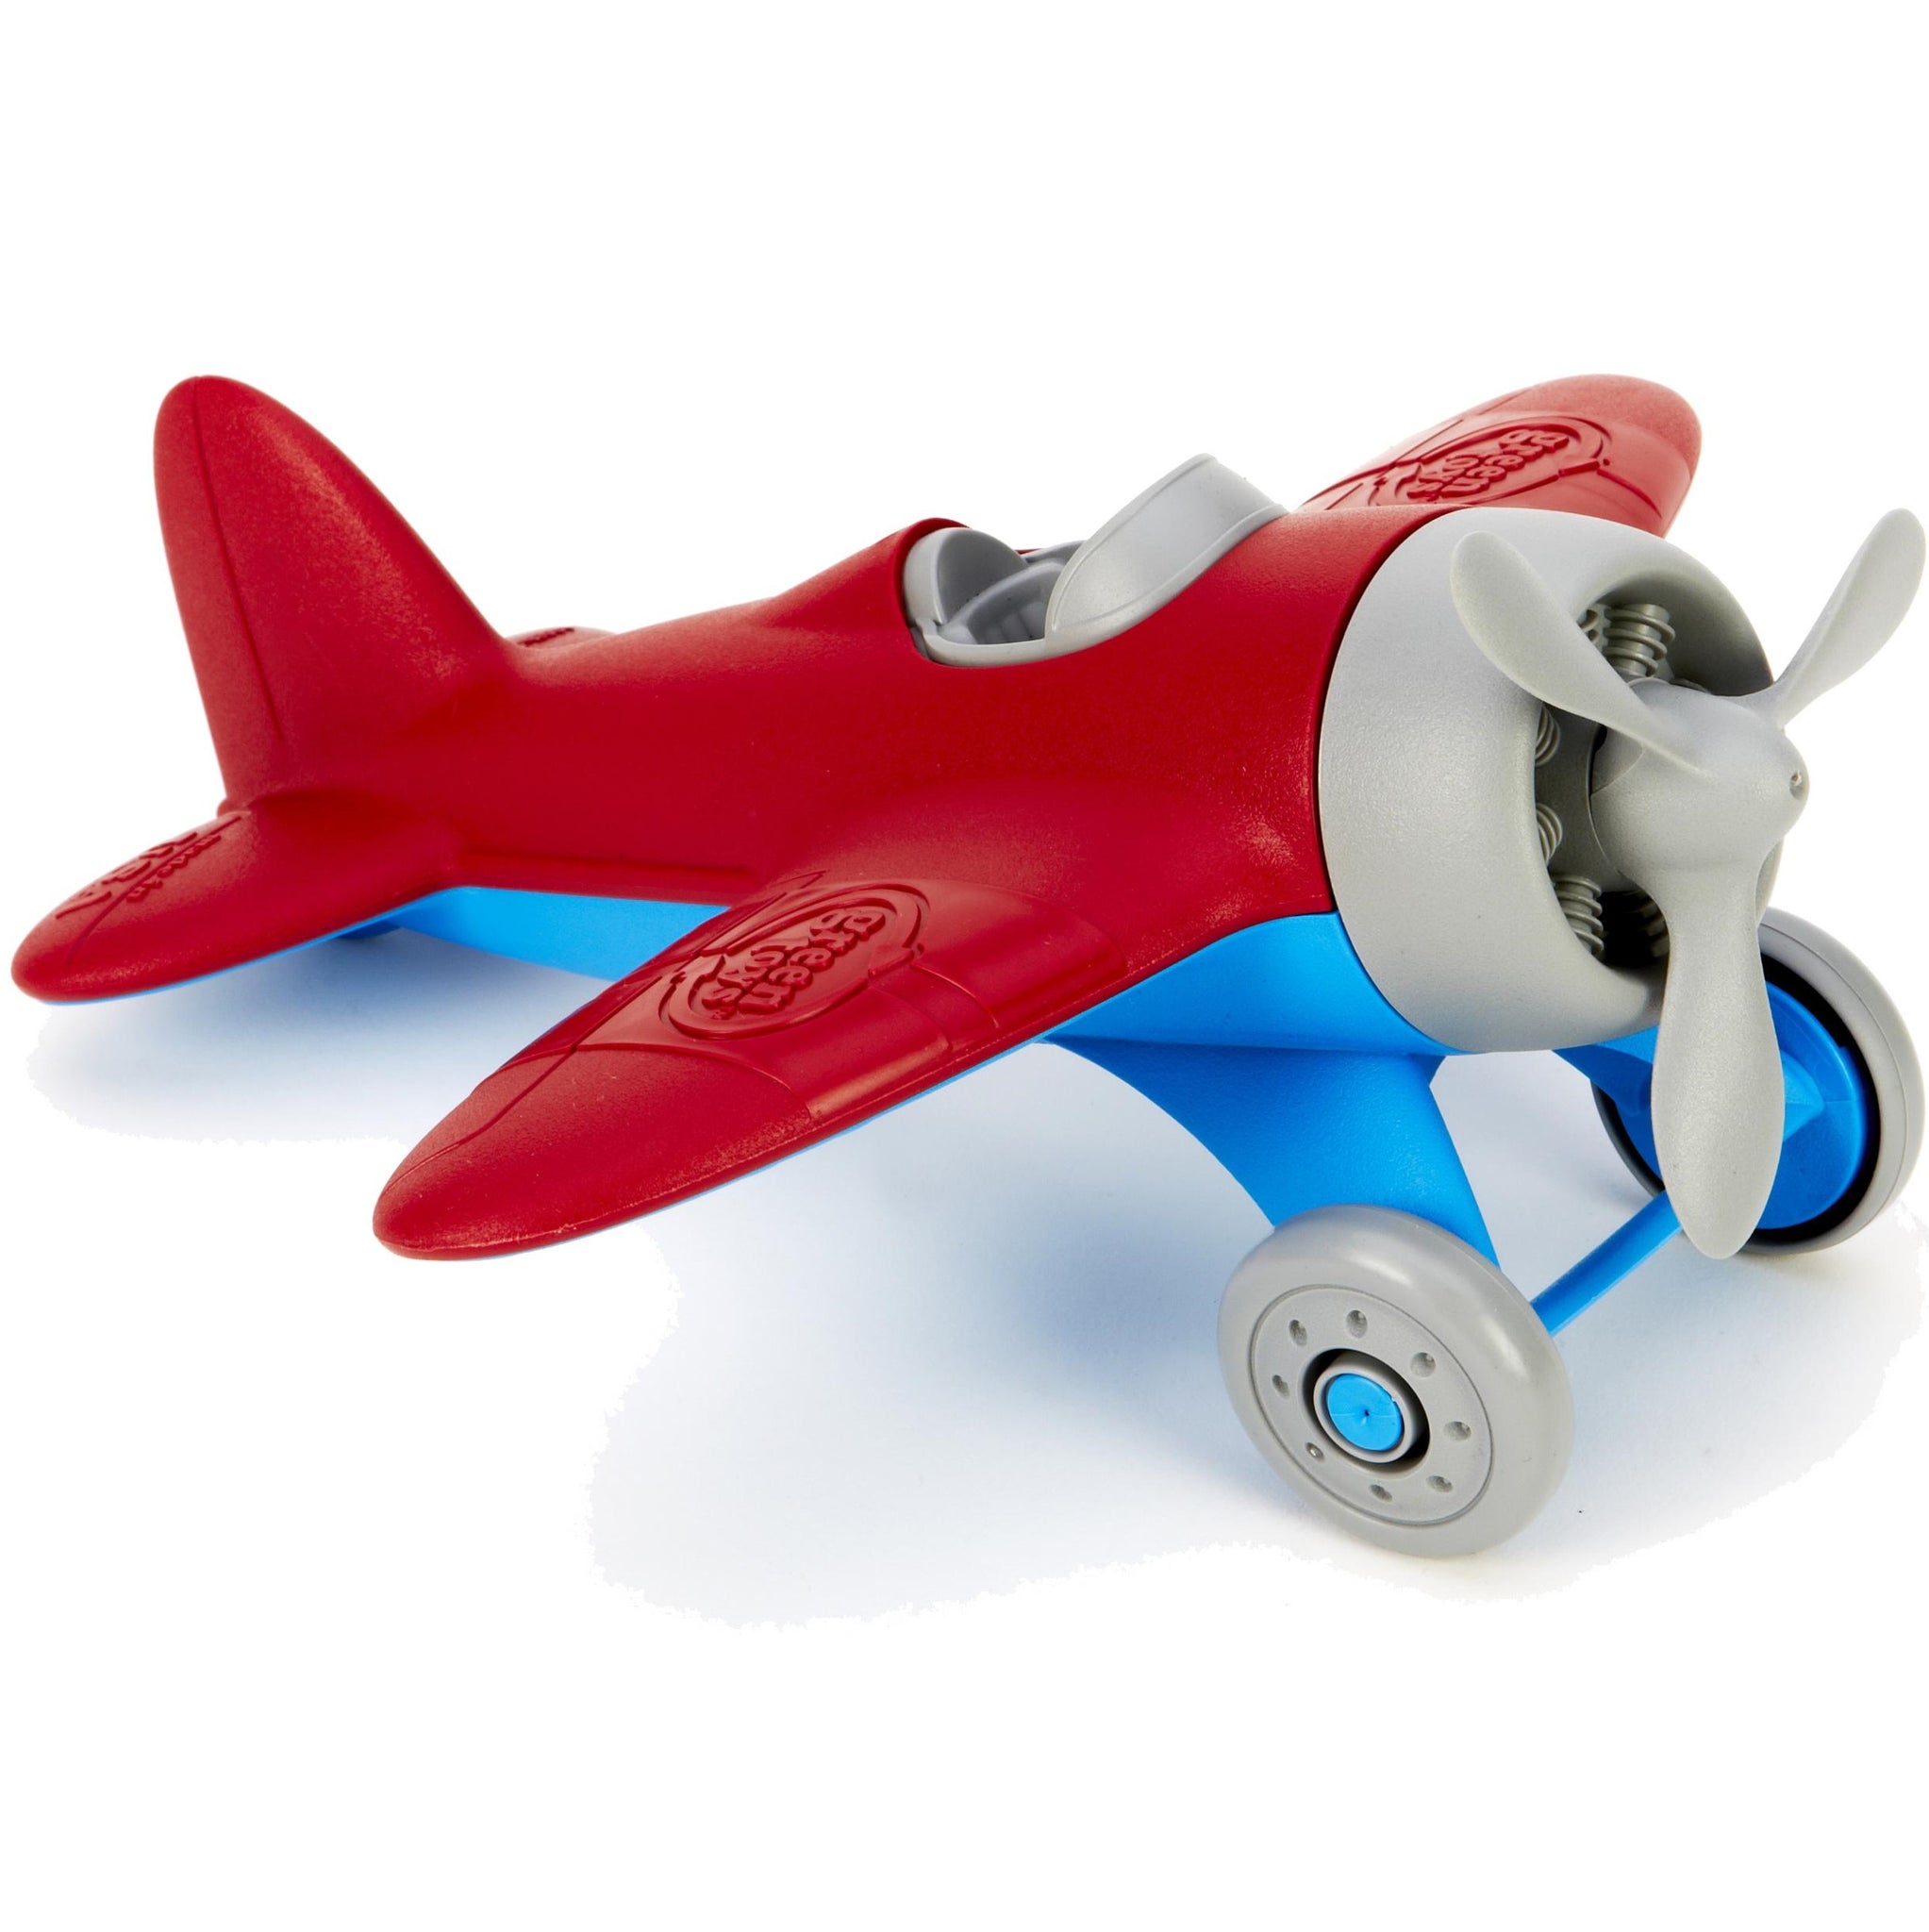 toy car that turns into a plane